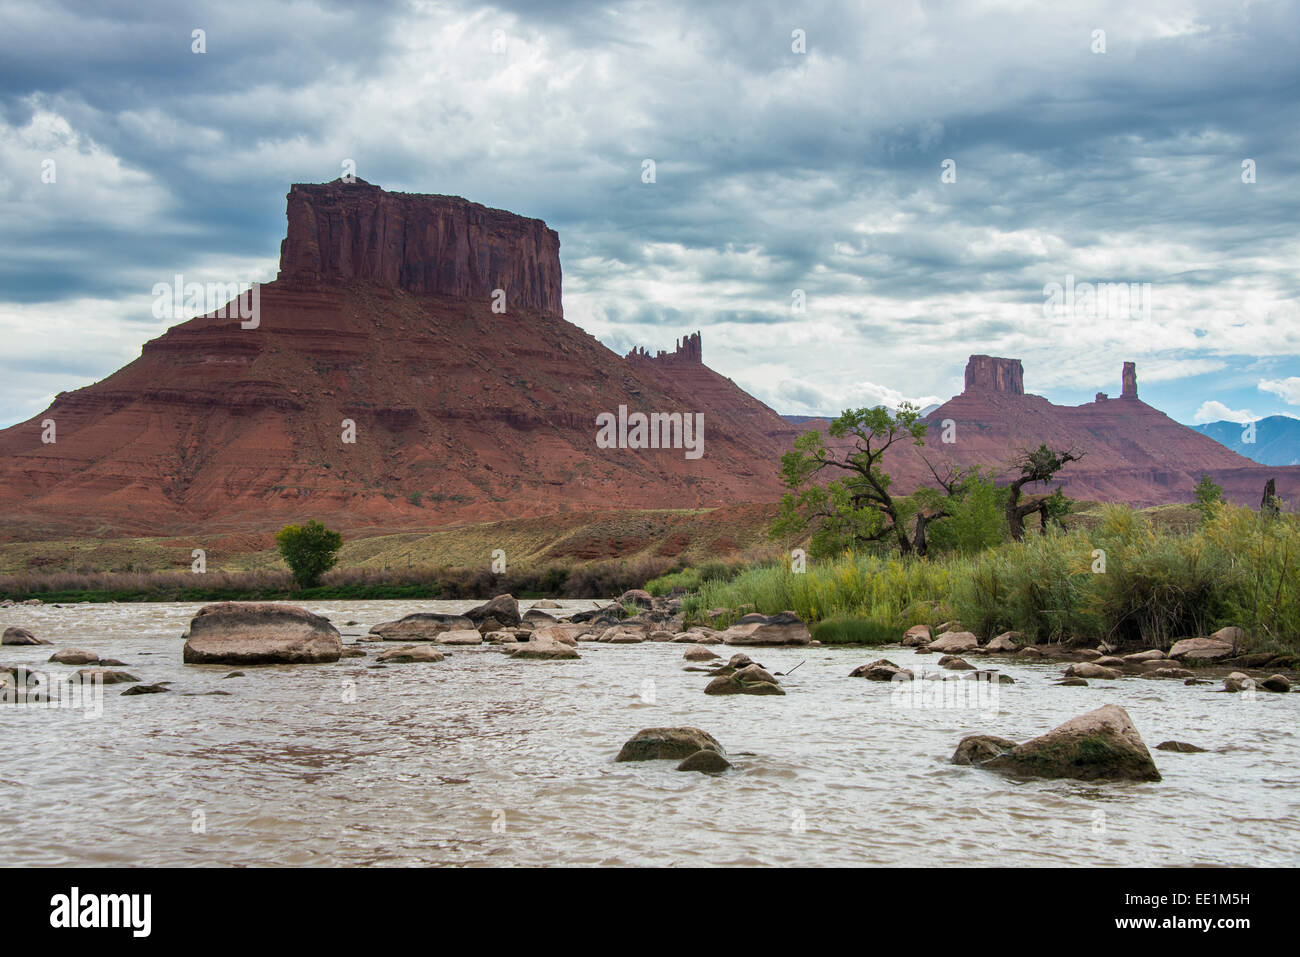 The Colorado River with Castle Valley in the background, near Moab, Utah, United States of America, North America Stock Photo